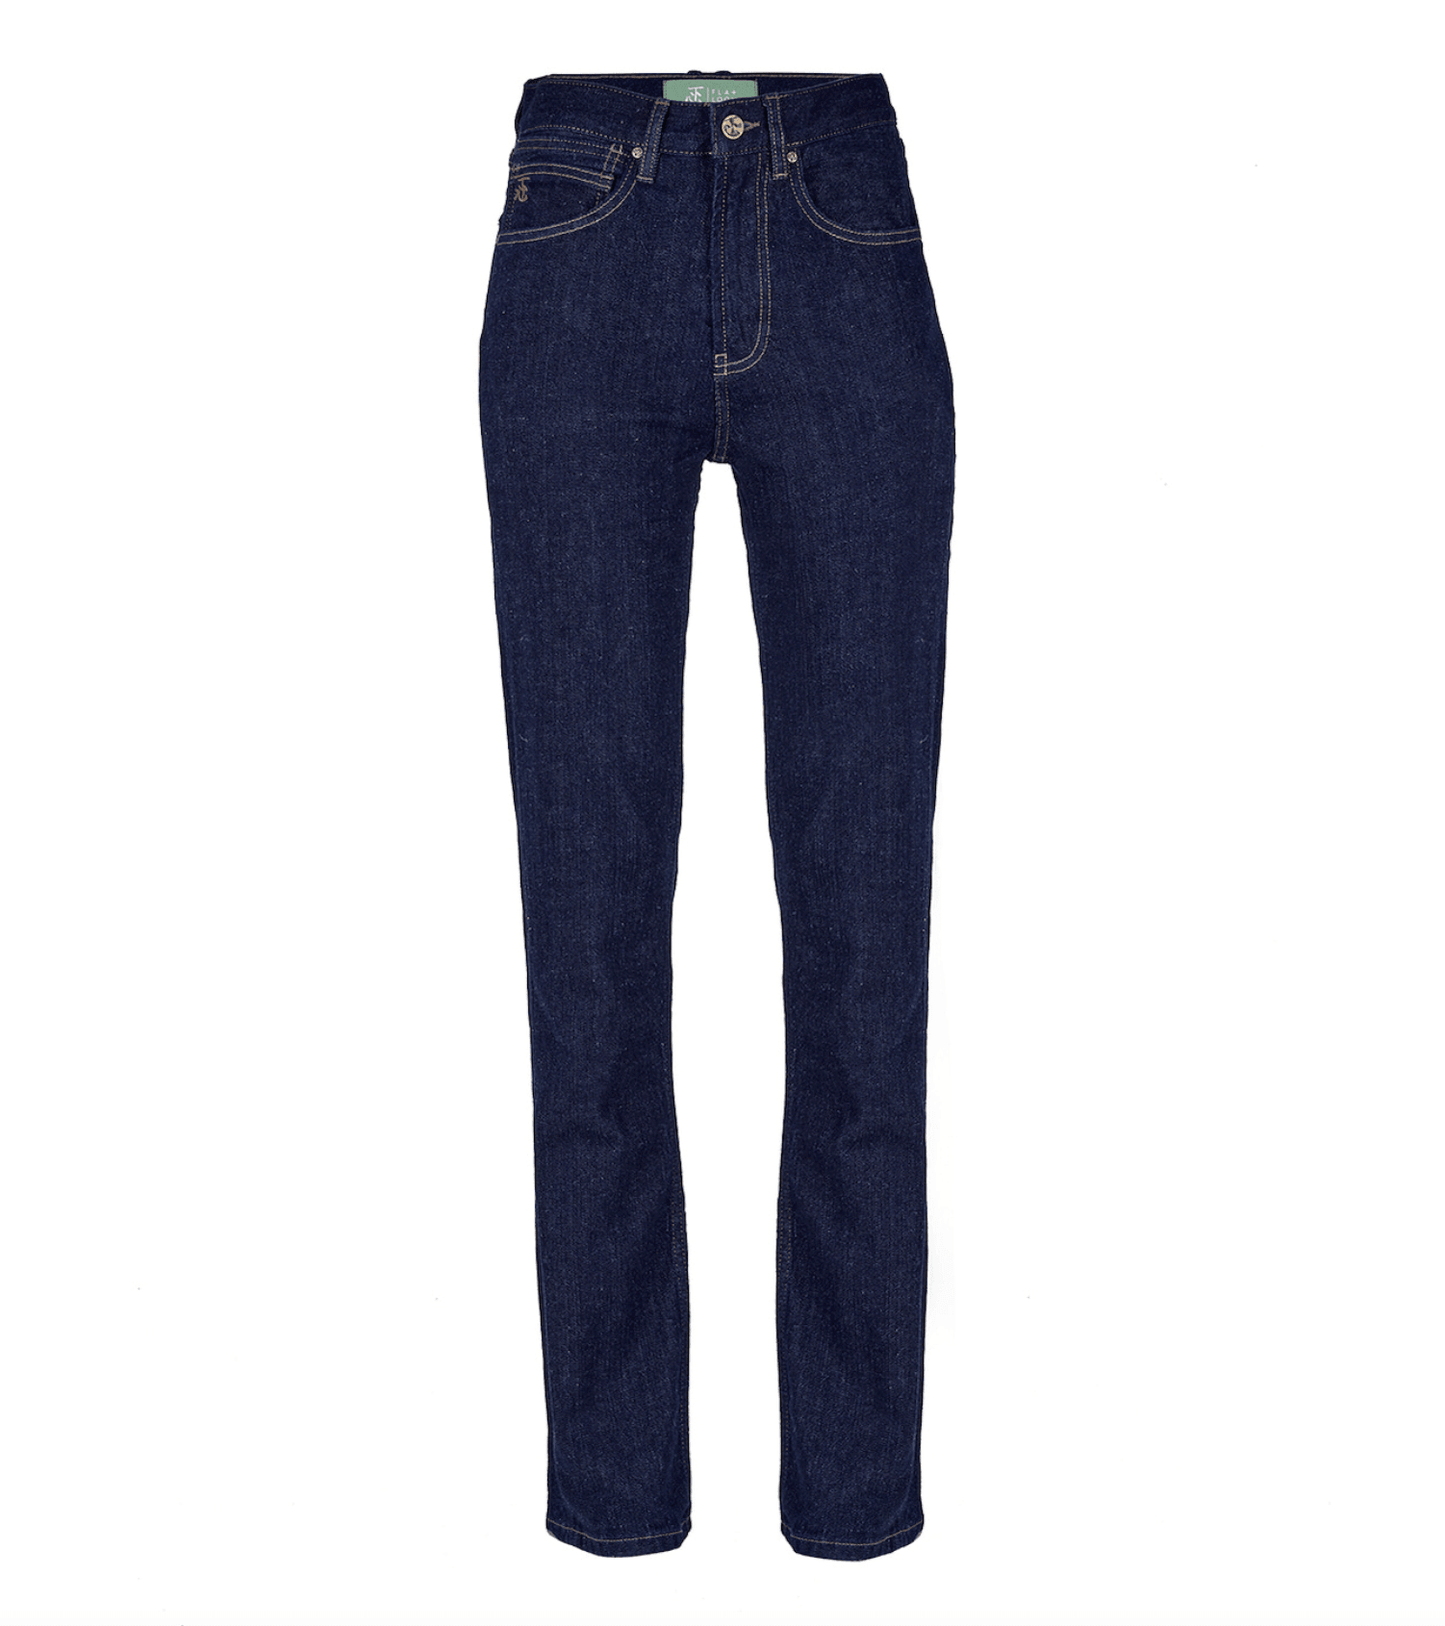 Flax and Loom Trousers Lucille Rinse Denim Jeans